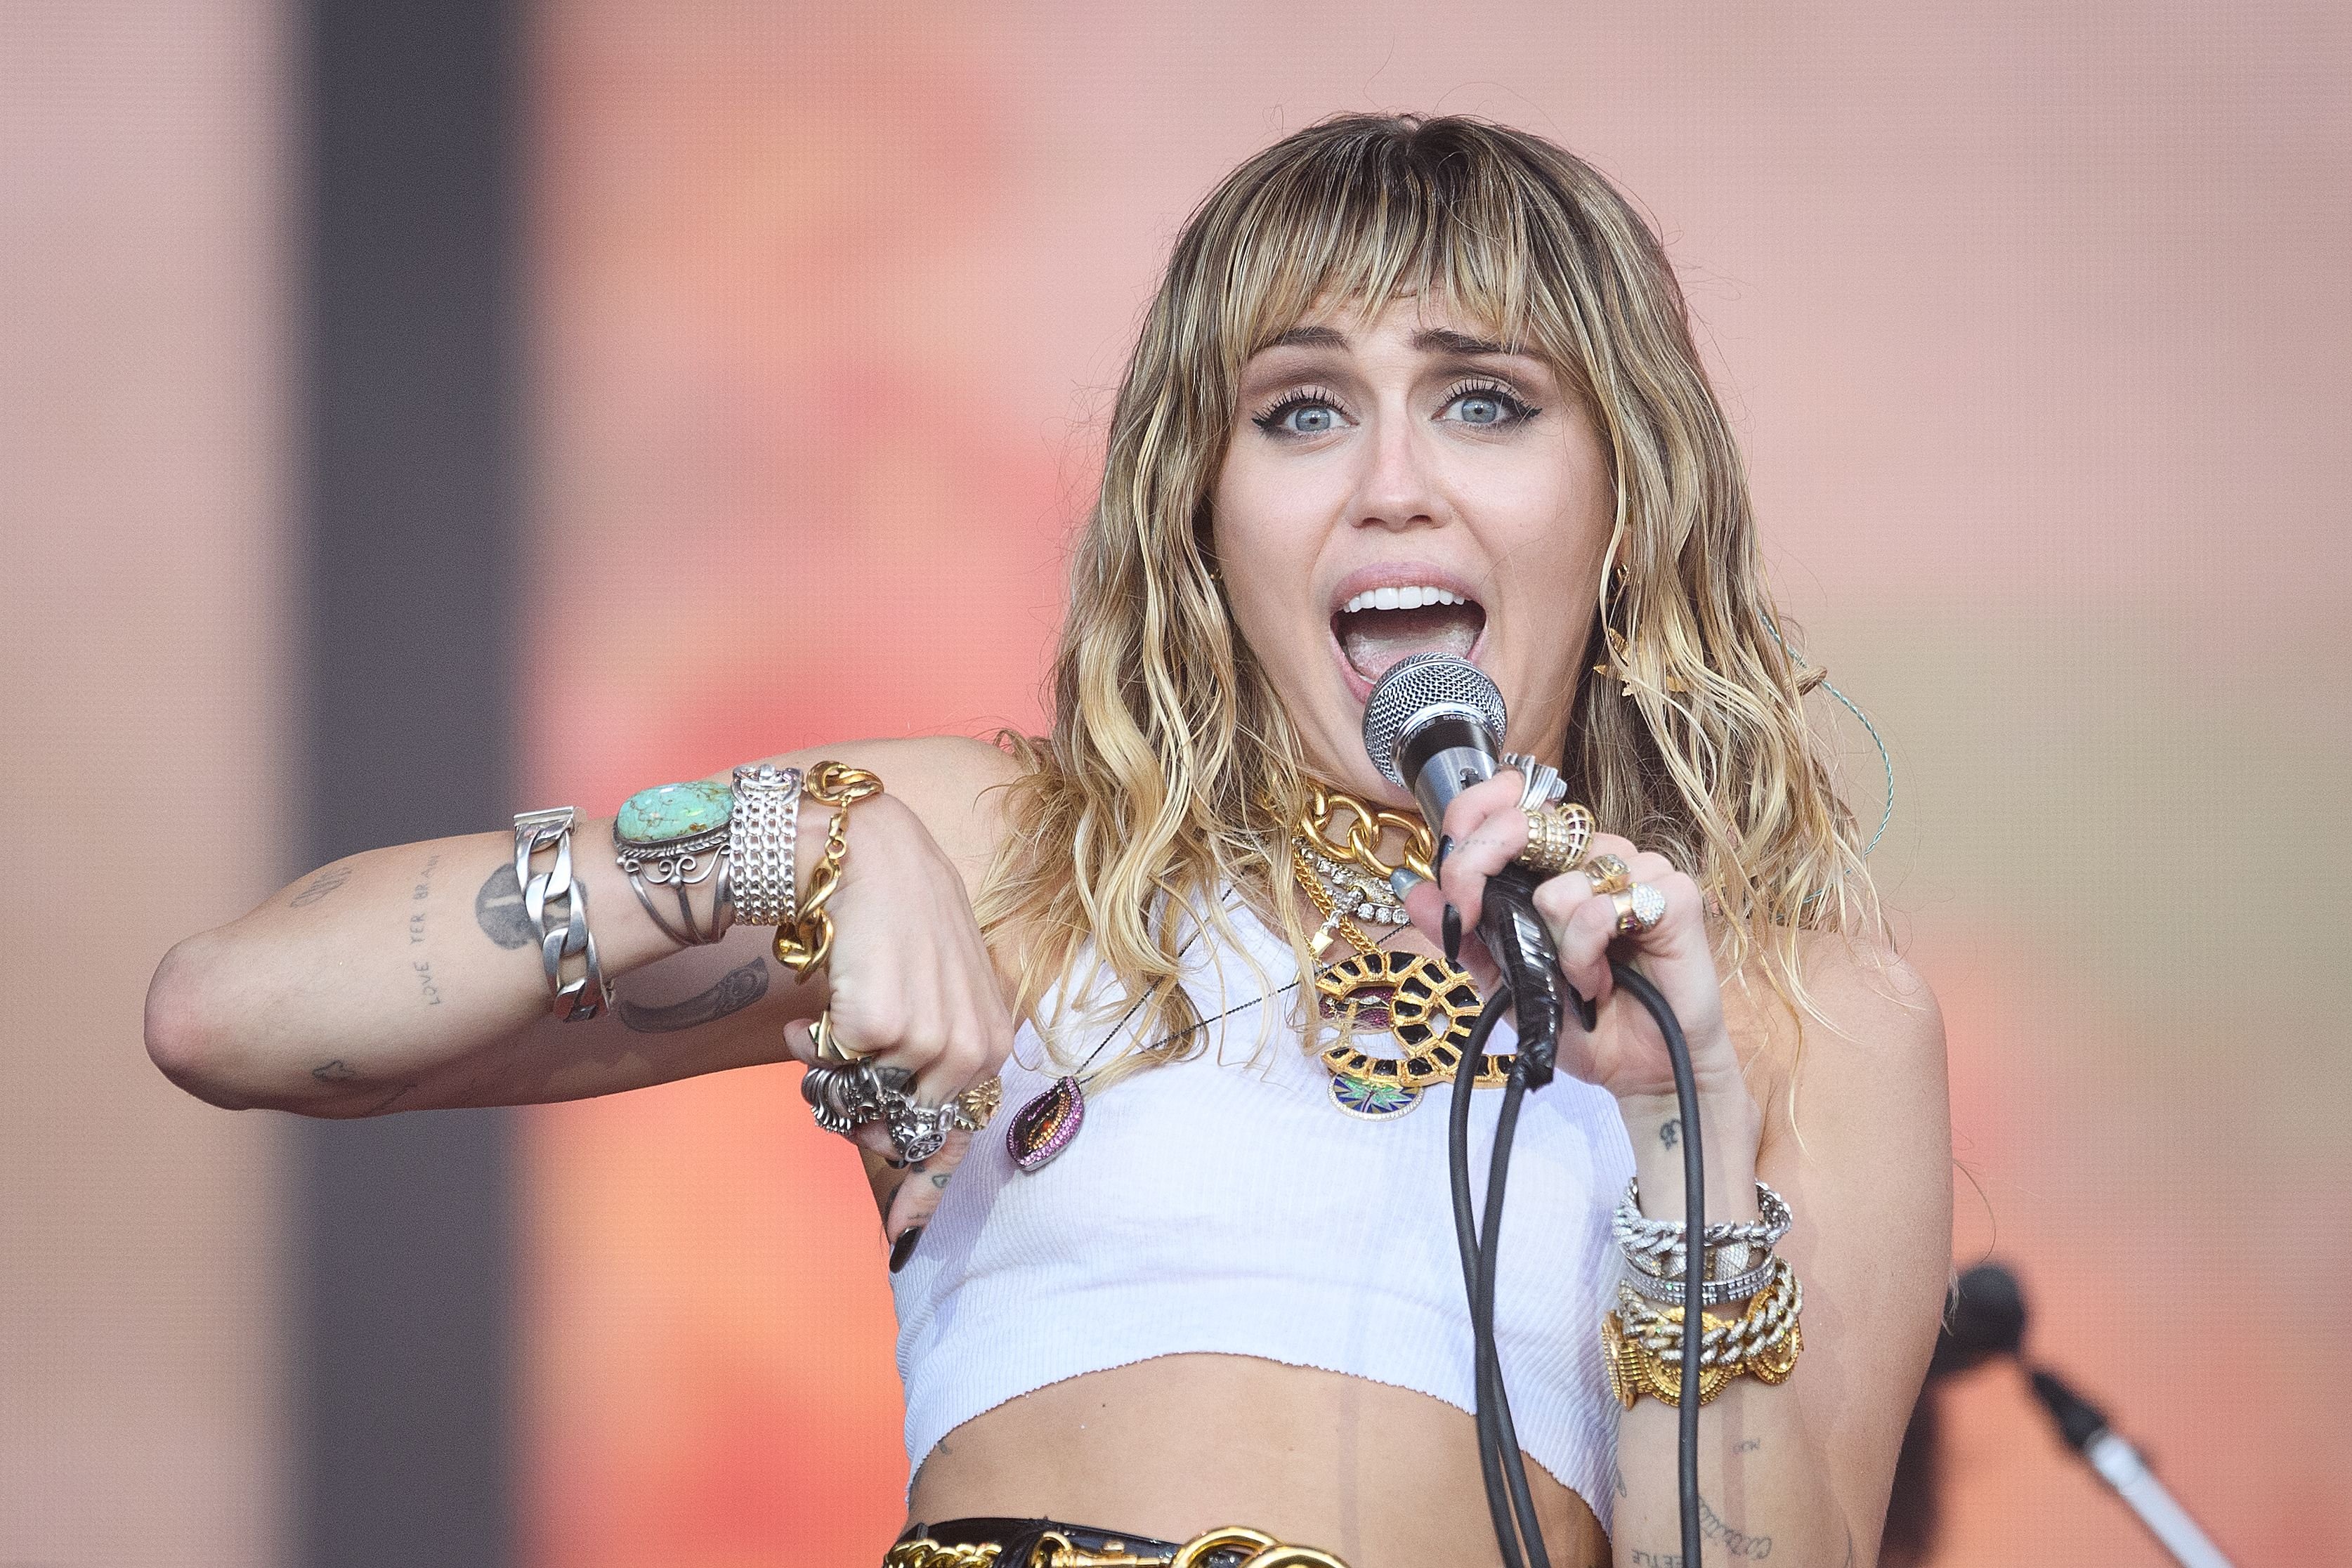 Miley Cyrus on the Pyramid Stage at the Glastonbury Festival at Worthy Farm, Pilton on June 30, 2019, in Glastonbury, England | Photo: Leon Neal/Getty Images